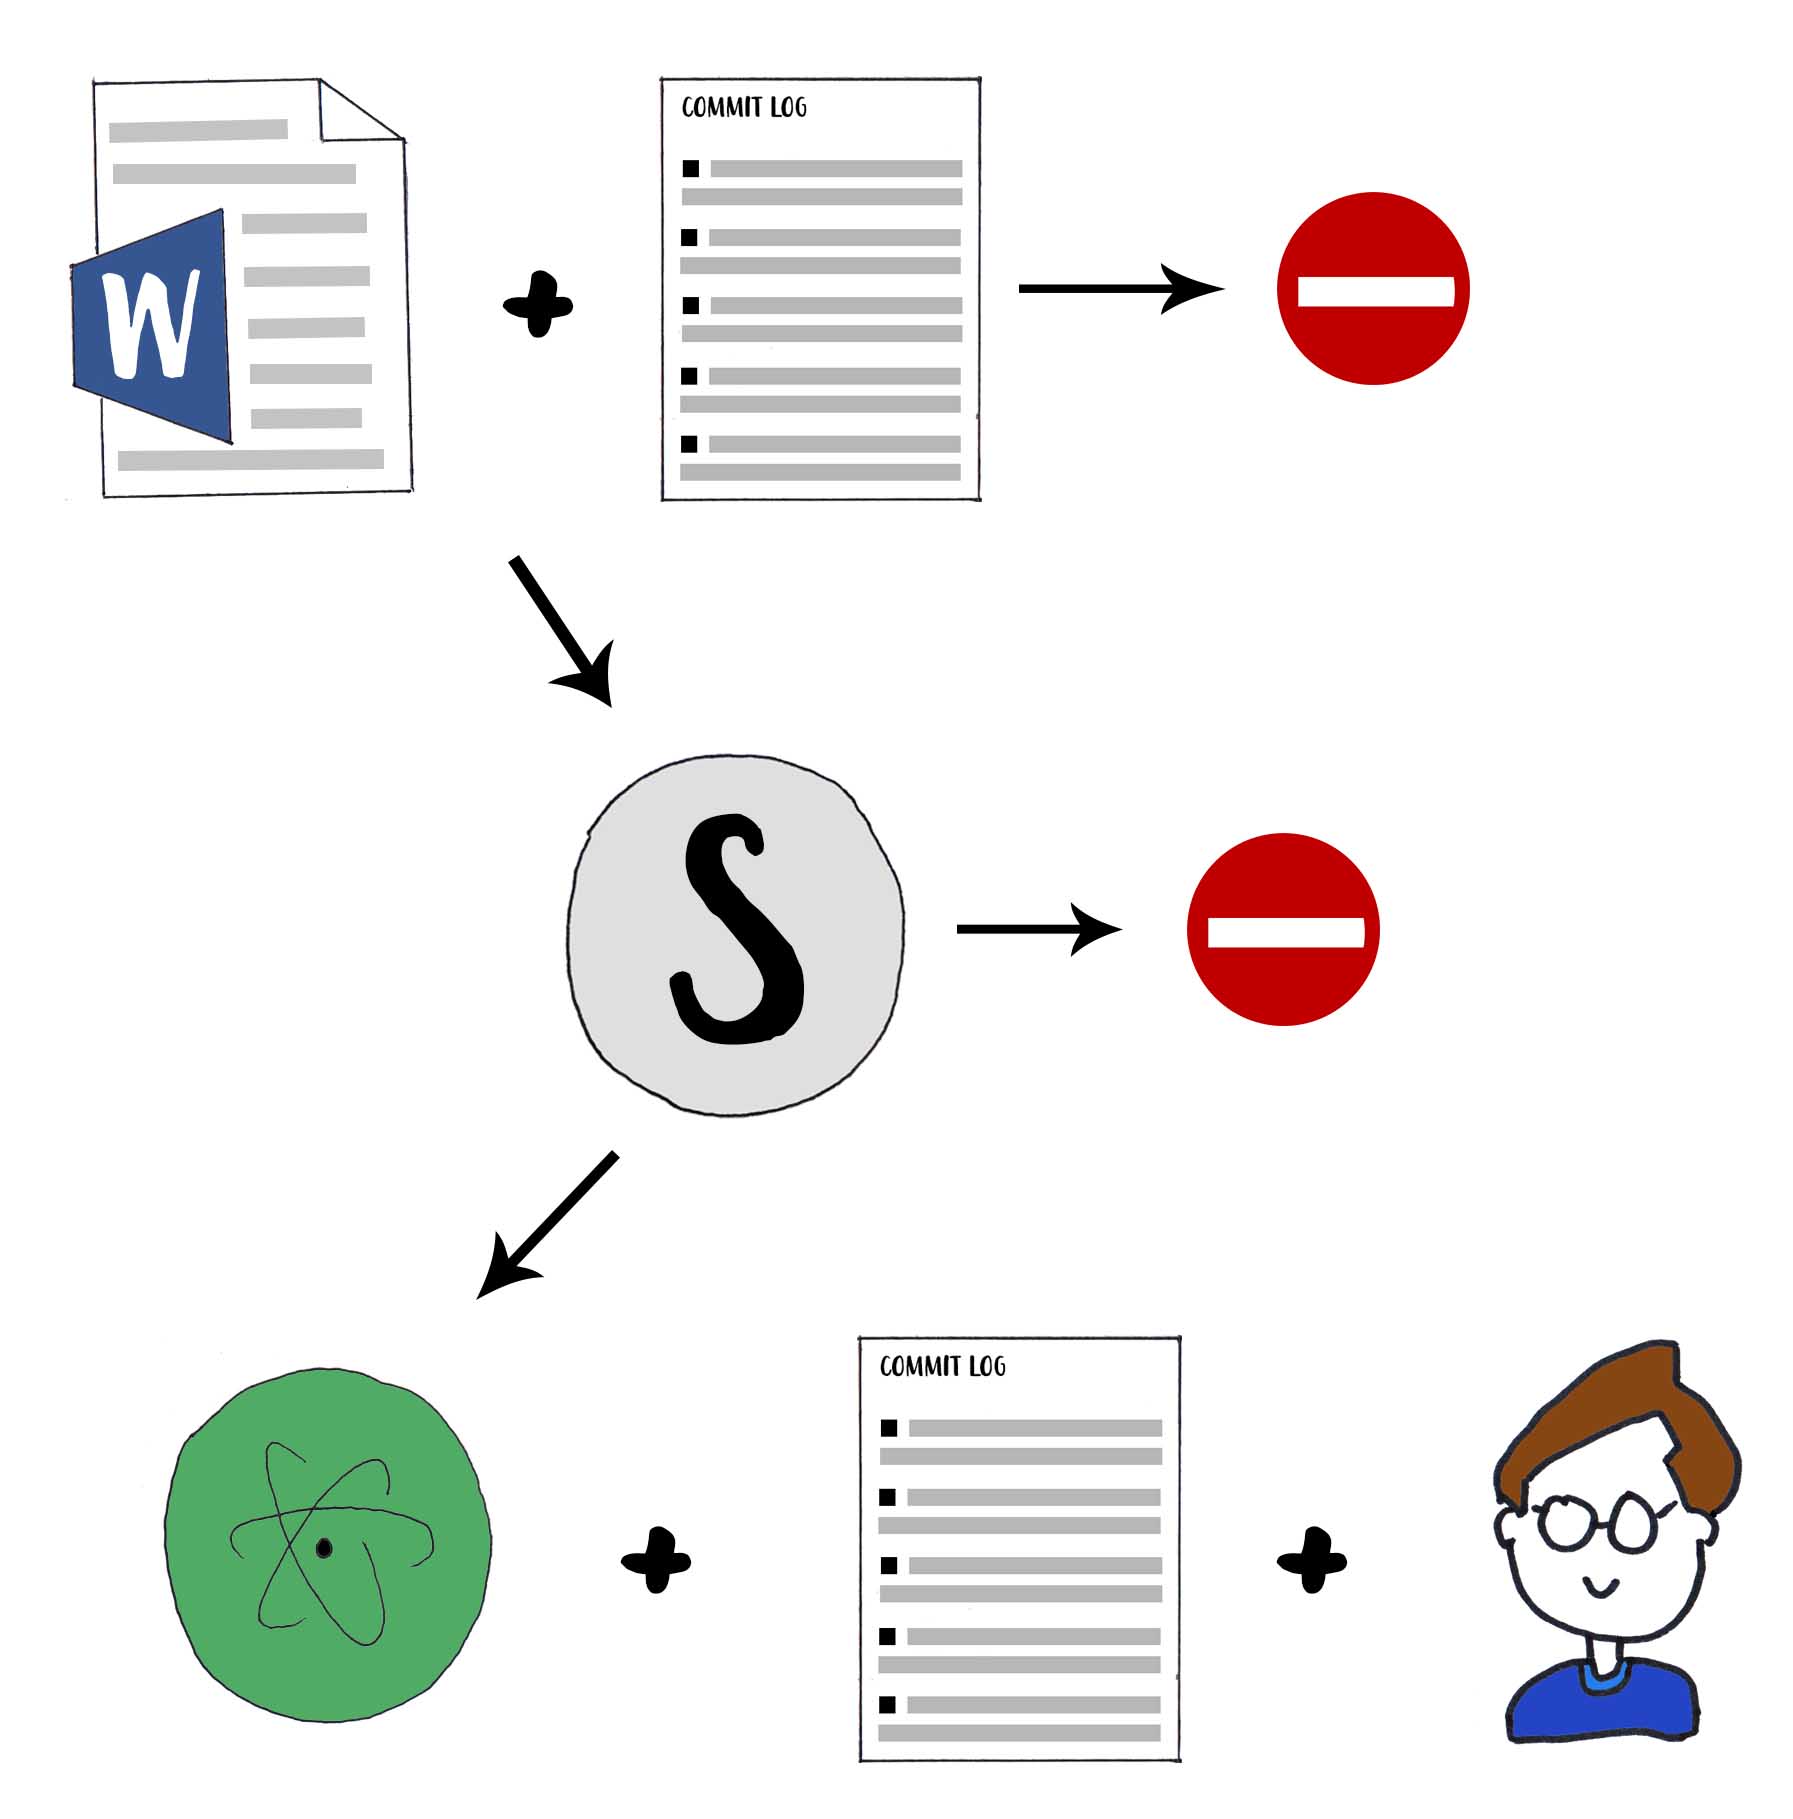 Workflow map depicting three different options: a Word document and commit log leading to a stop icon; a Scrivener icon leading to a stop icon; and an icon for the Atom text editor, a commit log, and an image of an advisor.